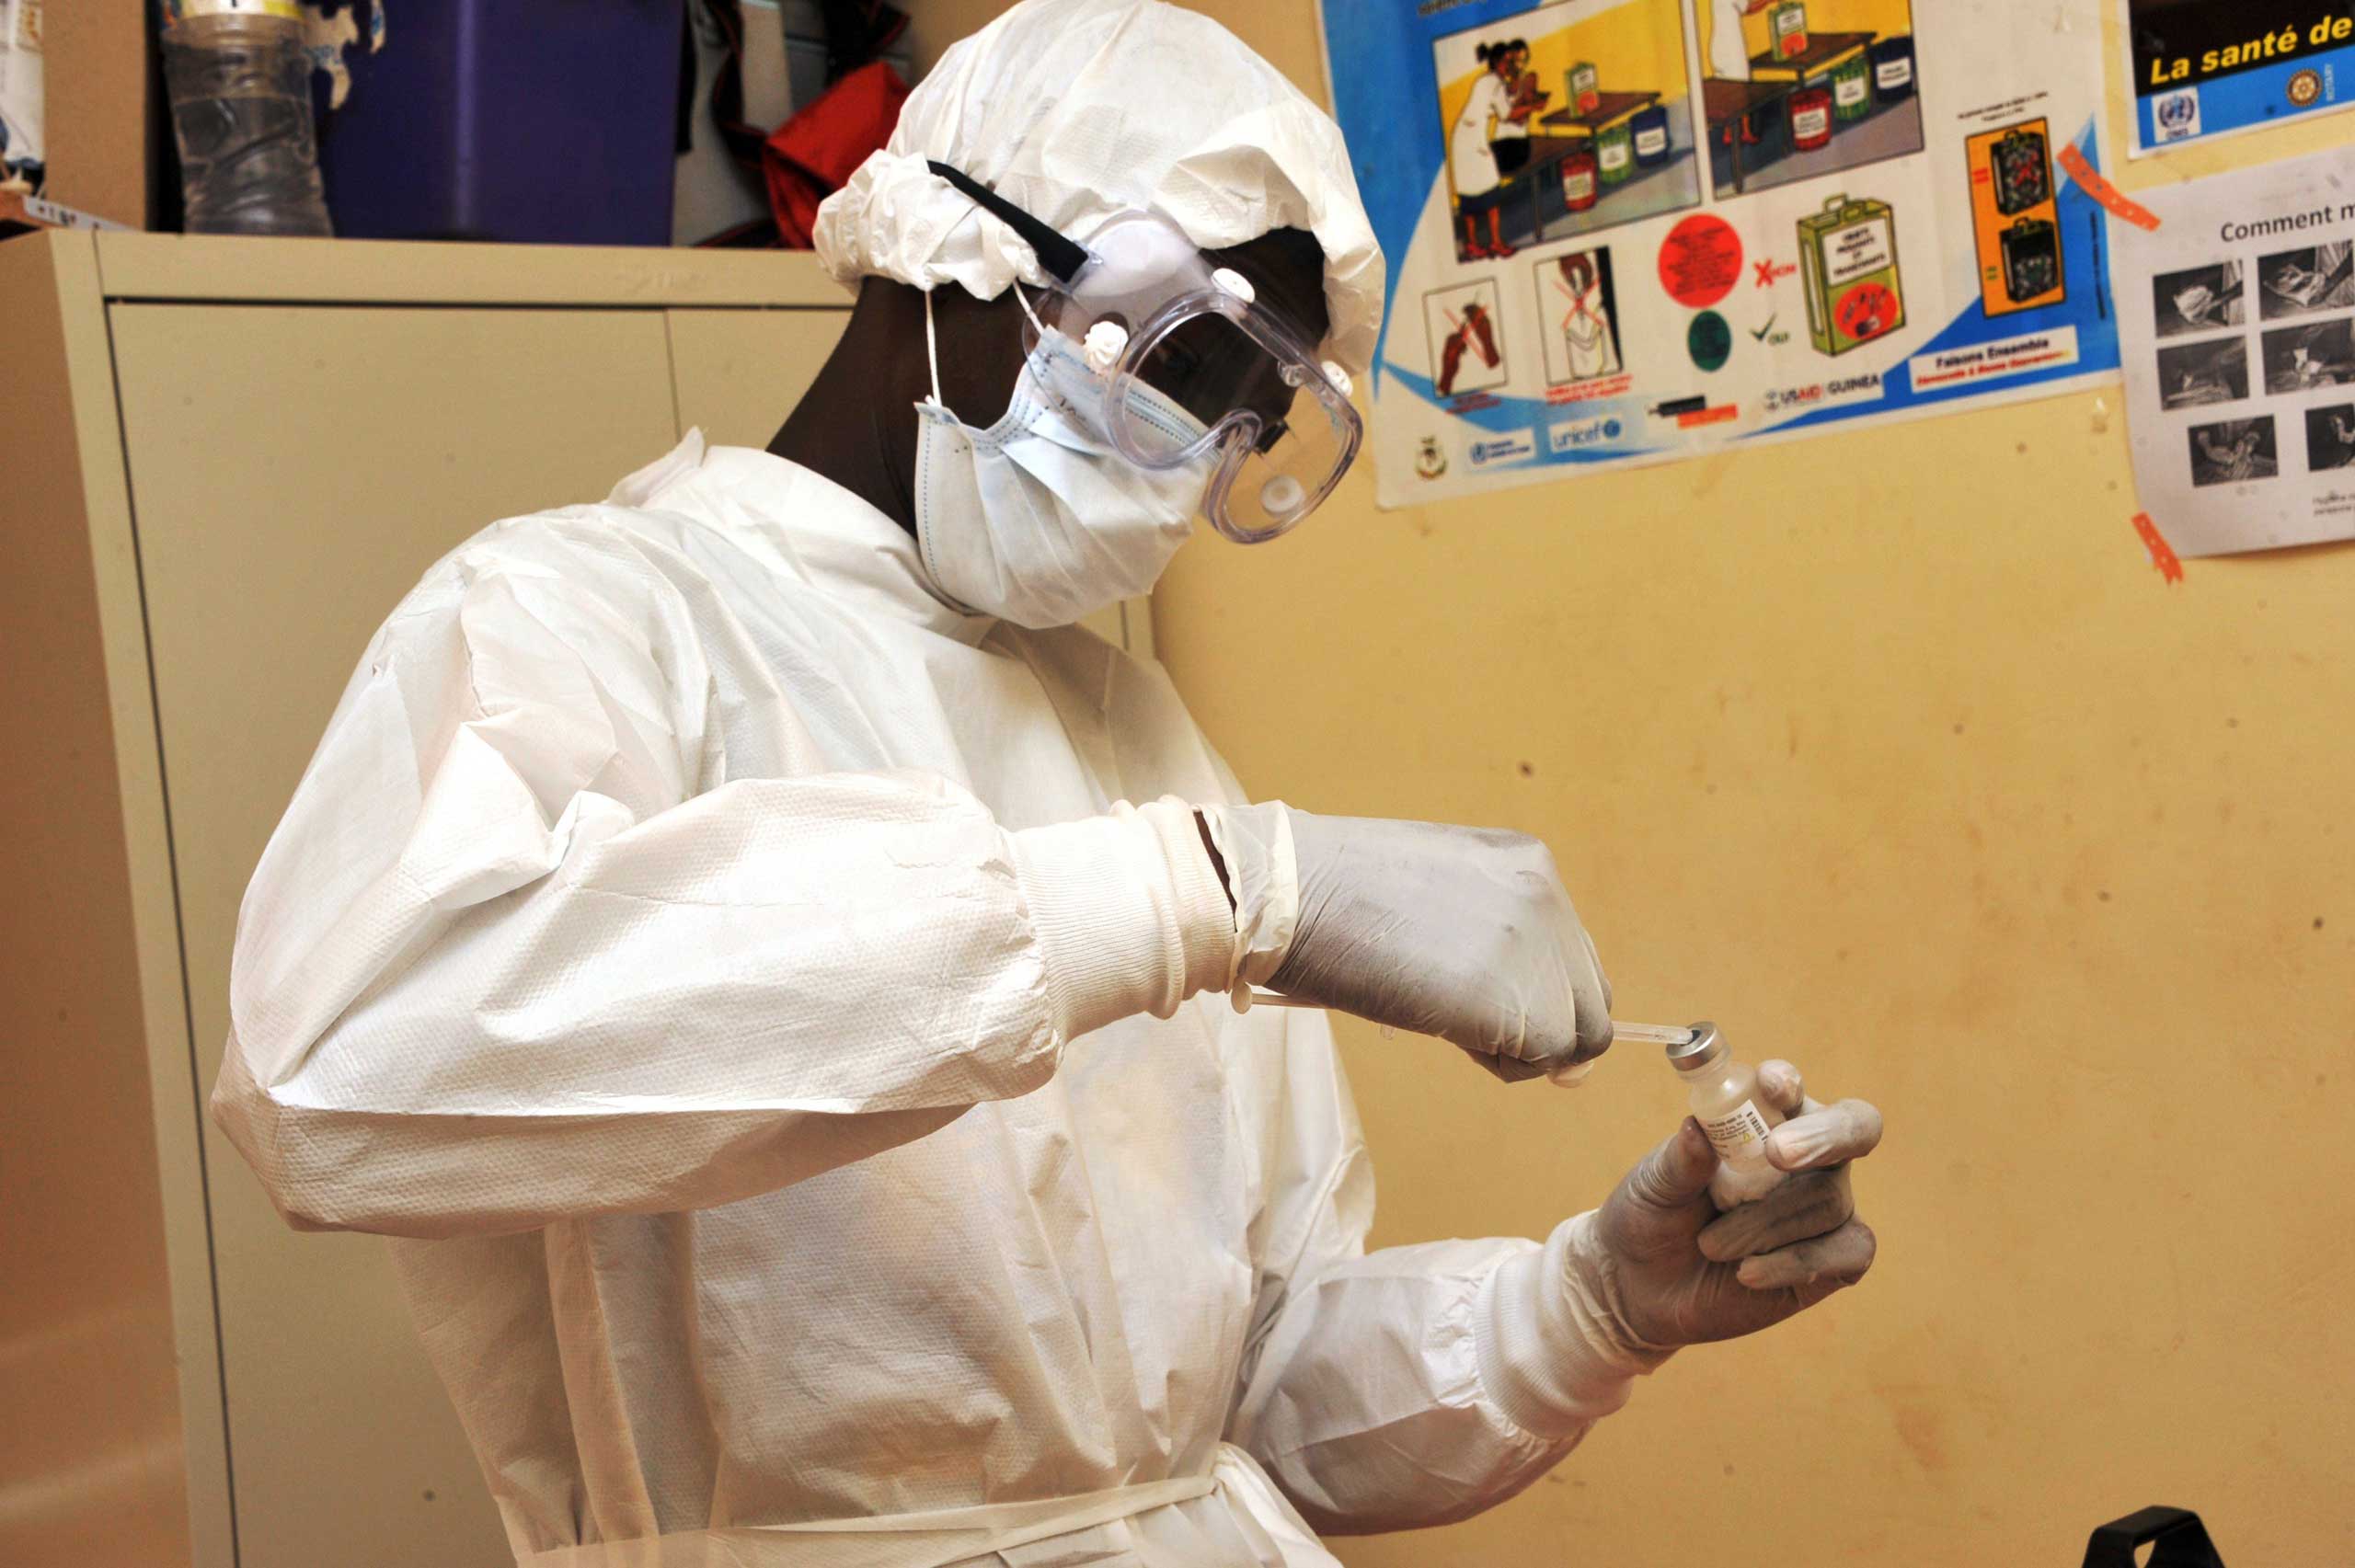 A health worker prepares a vaccination on March 10, 2015 at a health center in Conakry during the first clinical trials of the VSV-EBOV vaccine against the Ebola virus.